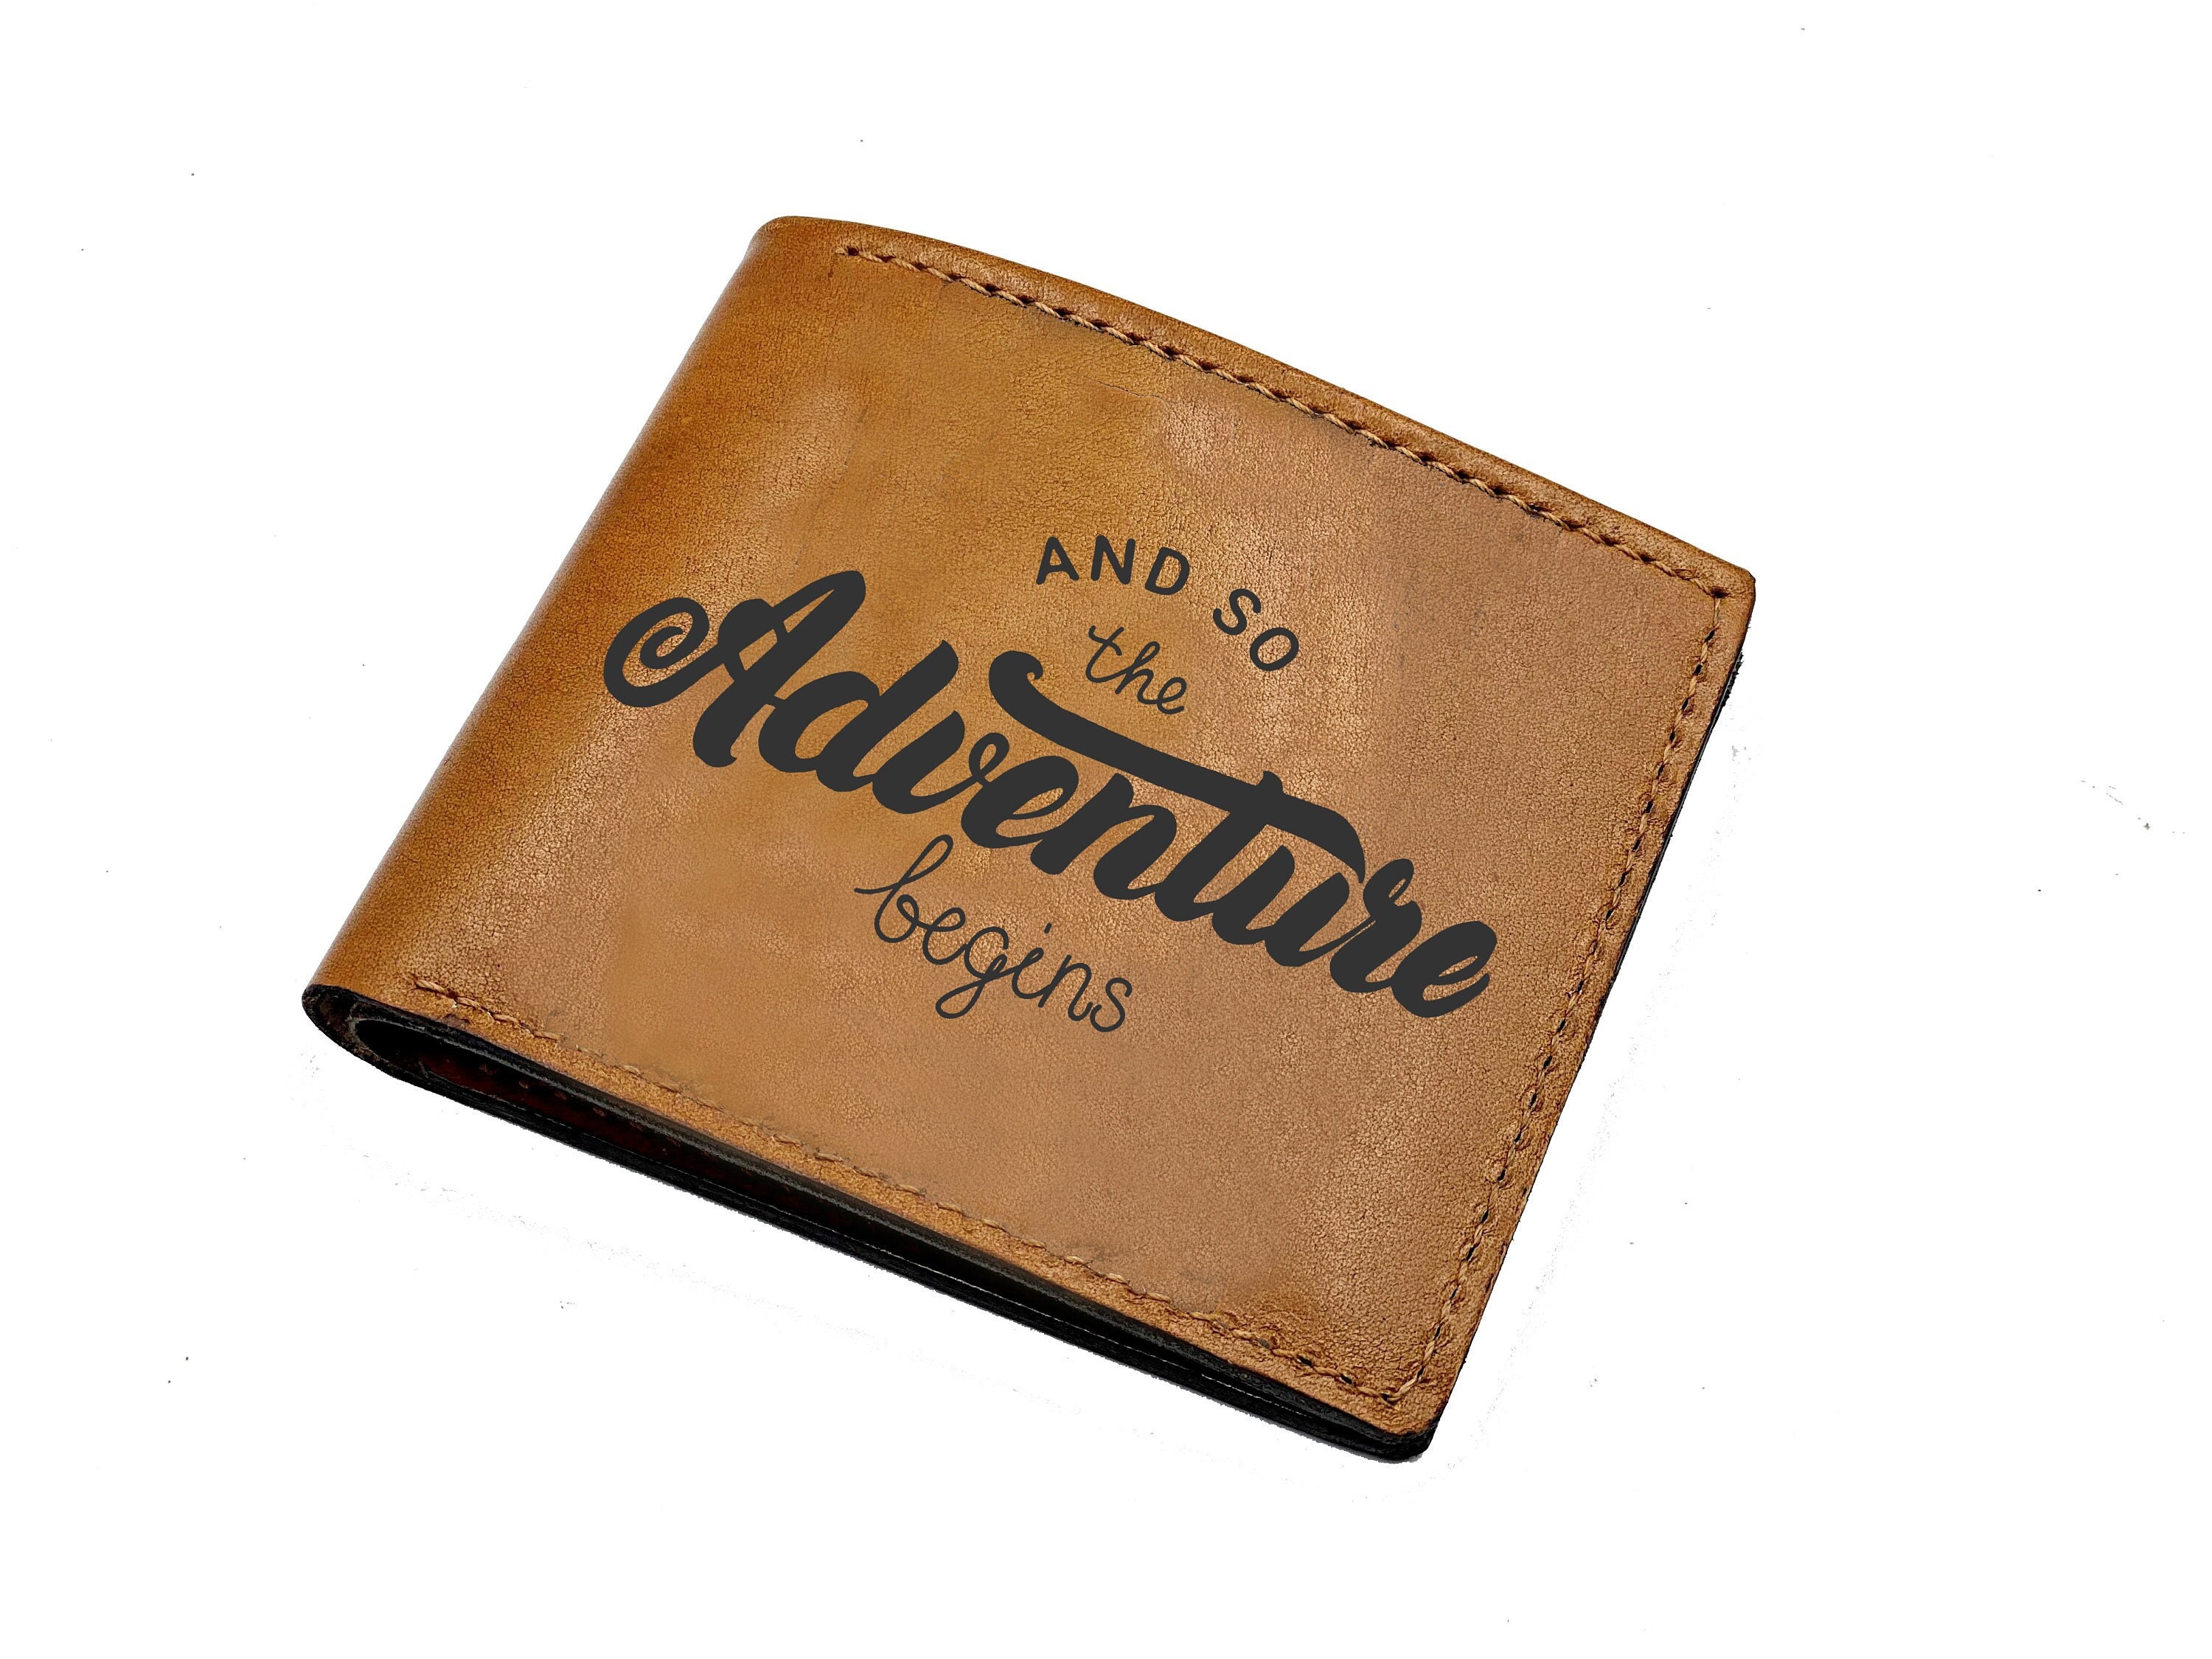 Personalized Adventure Typography Men's Gift, Leather Wallet, Traveling Wallet For Him, Wedding Graduation Anniversary Gift